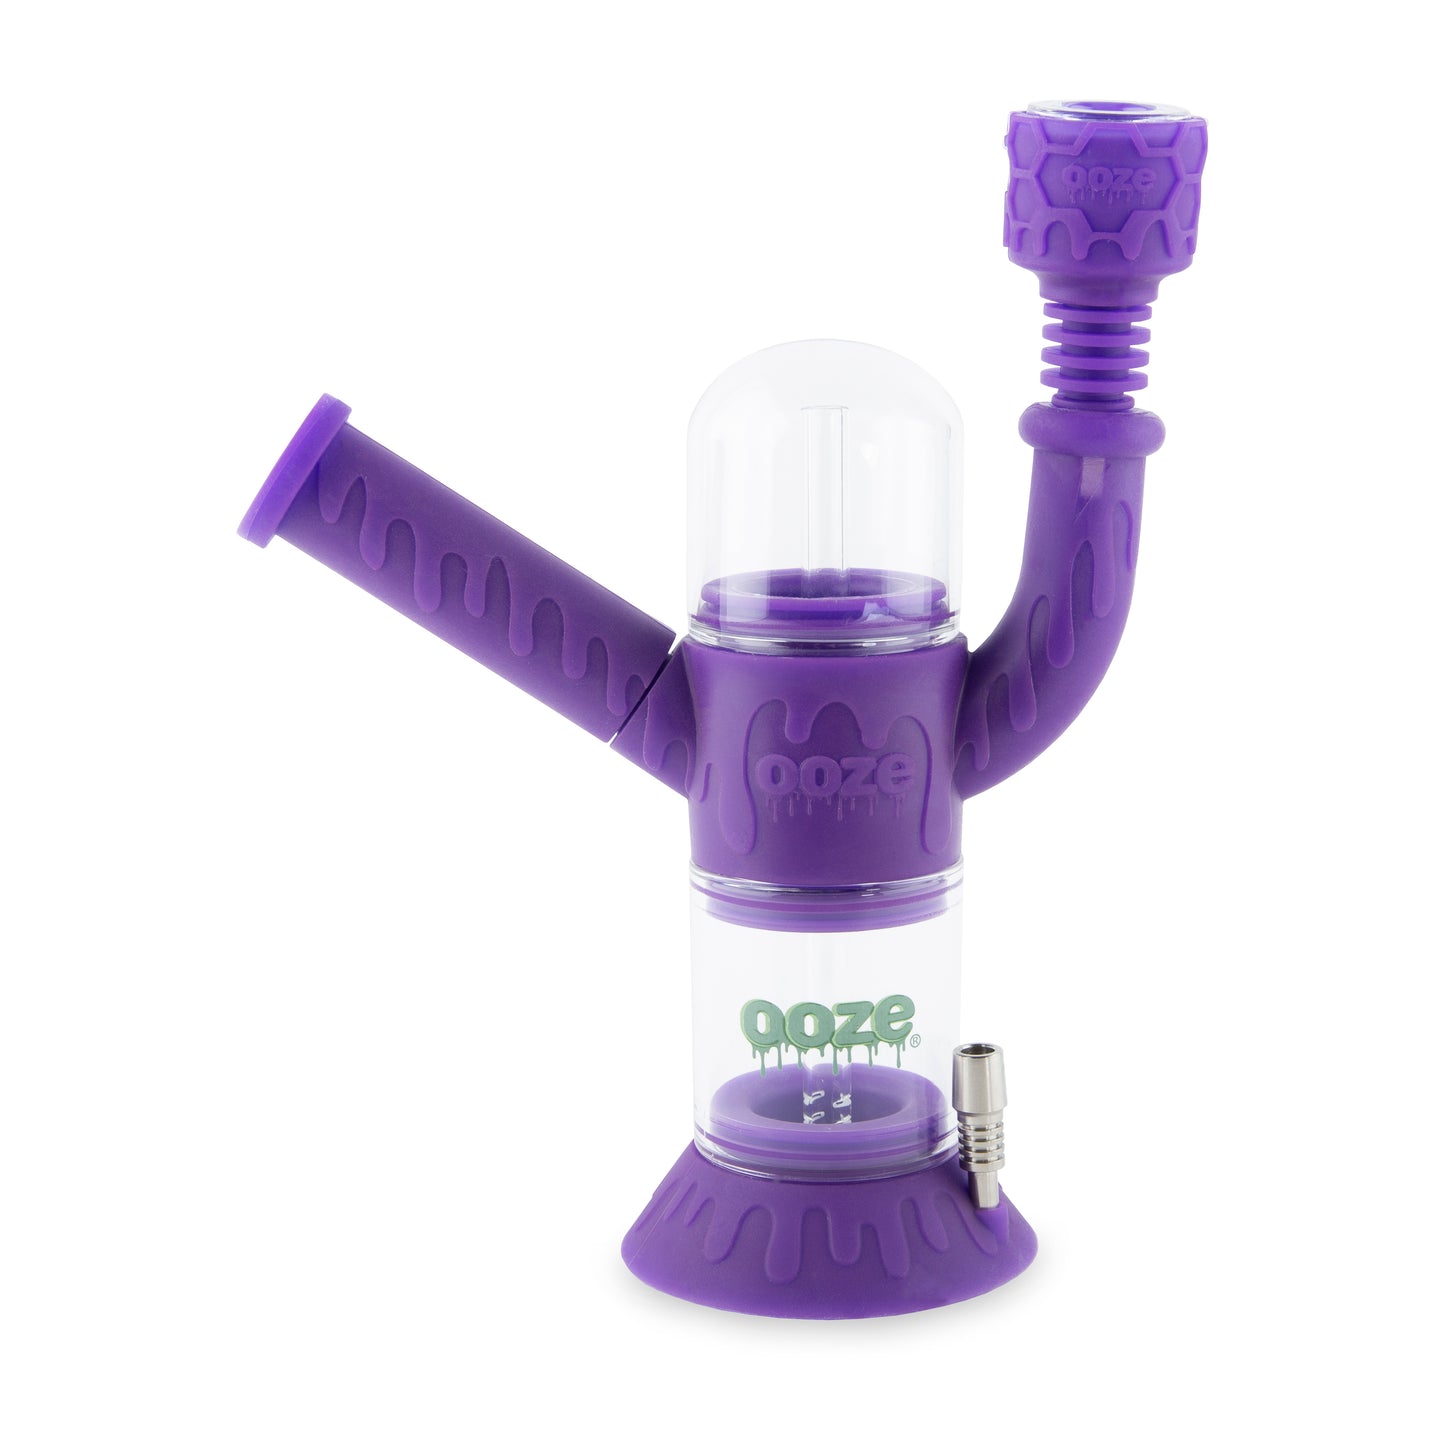 Straw Set / Wax Carving / Dab Tool Kit - Mr. Purple - Glass Water Pipes,  Bongs, RAW Cones/Papers, And Much More